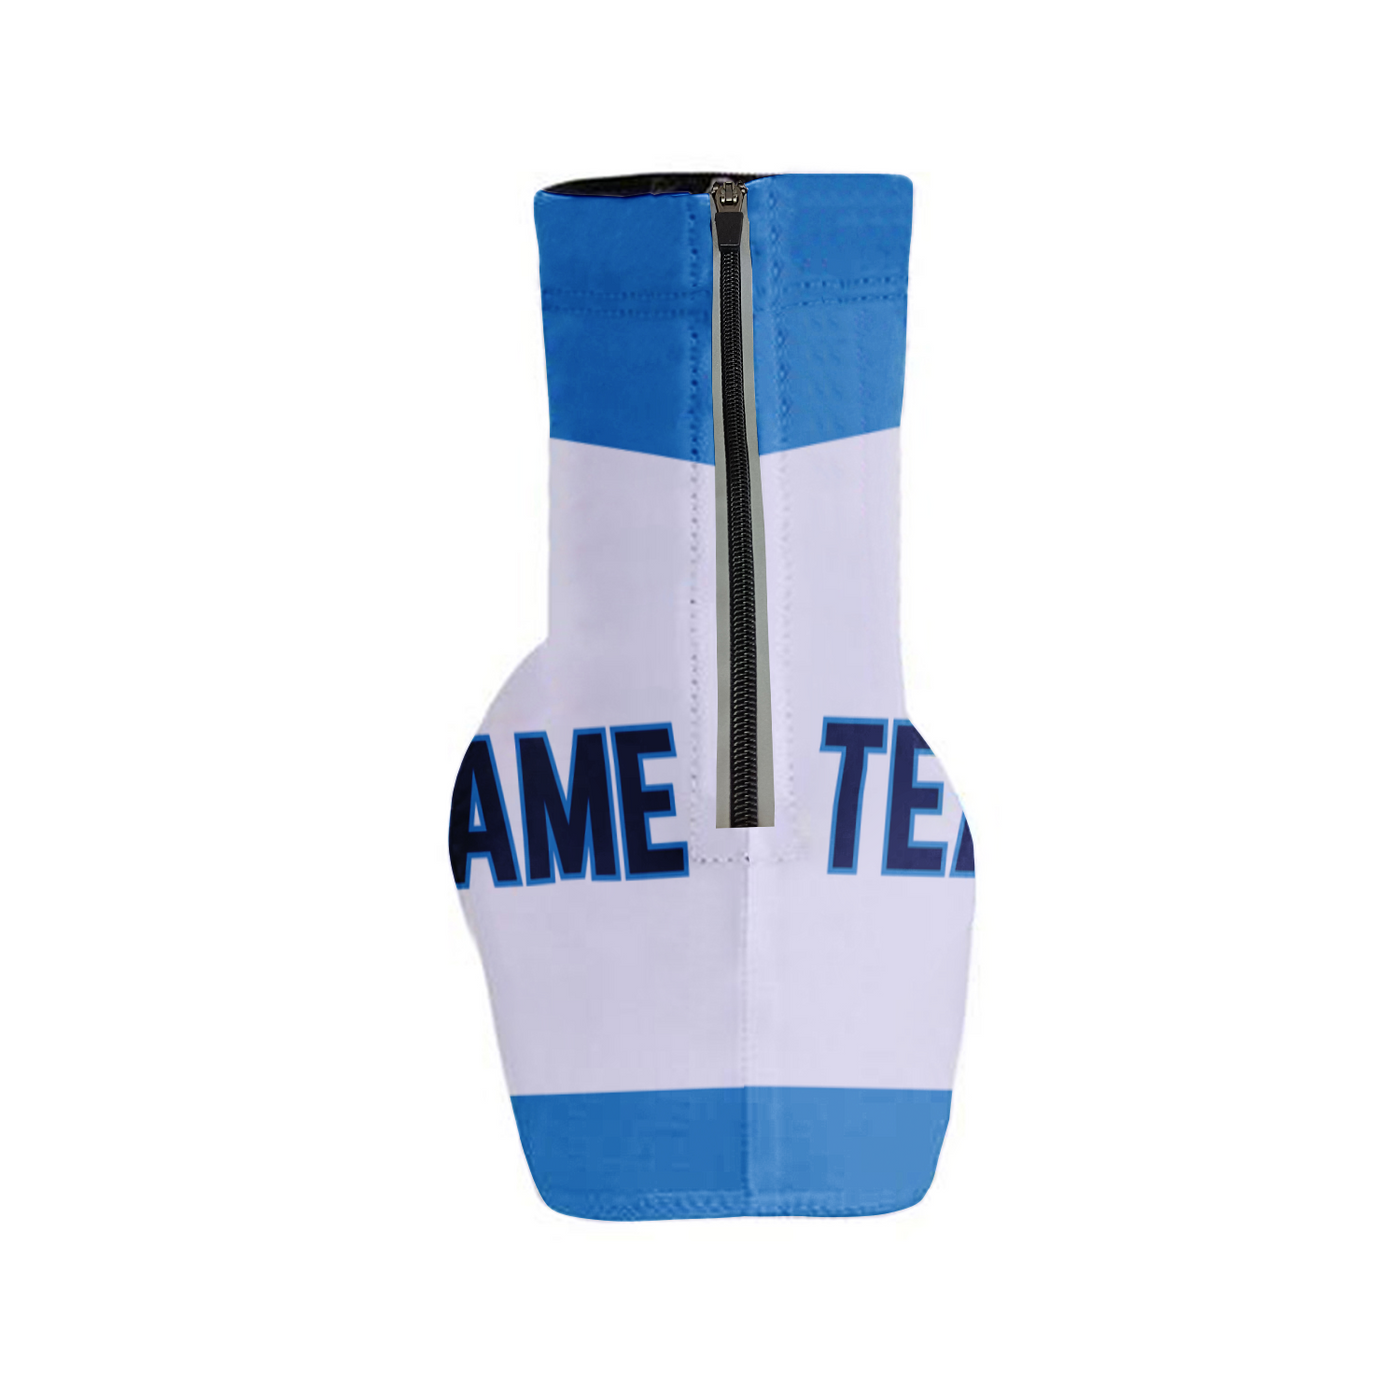 Customized Tennessee Team Cycling Shoe Covers